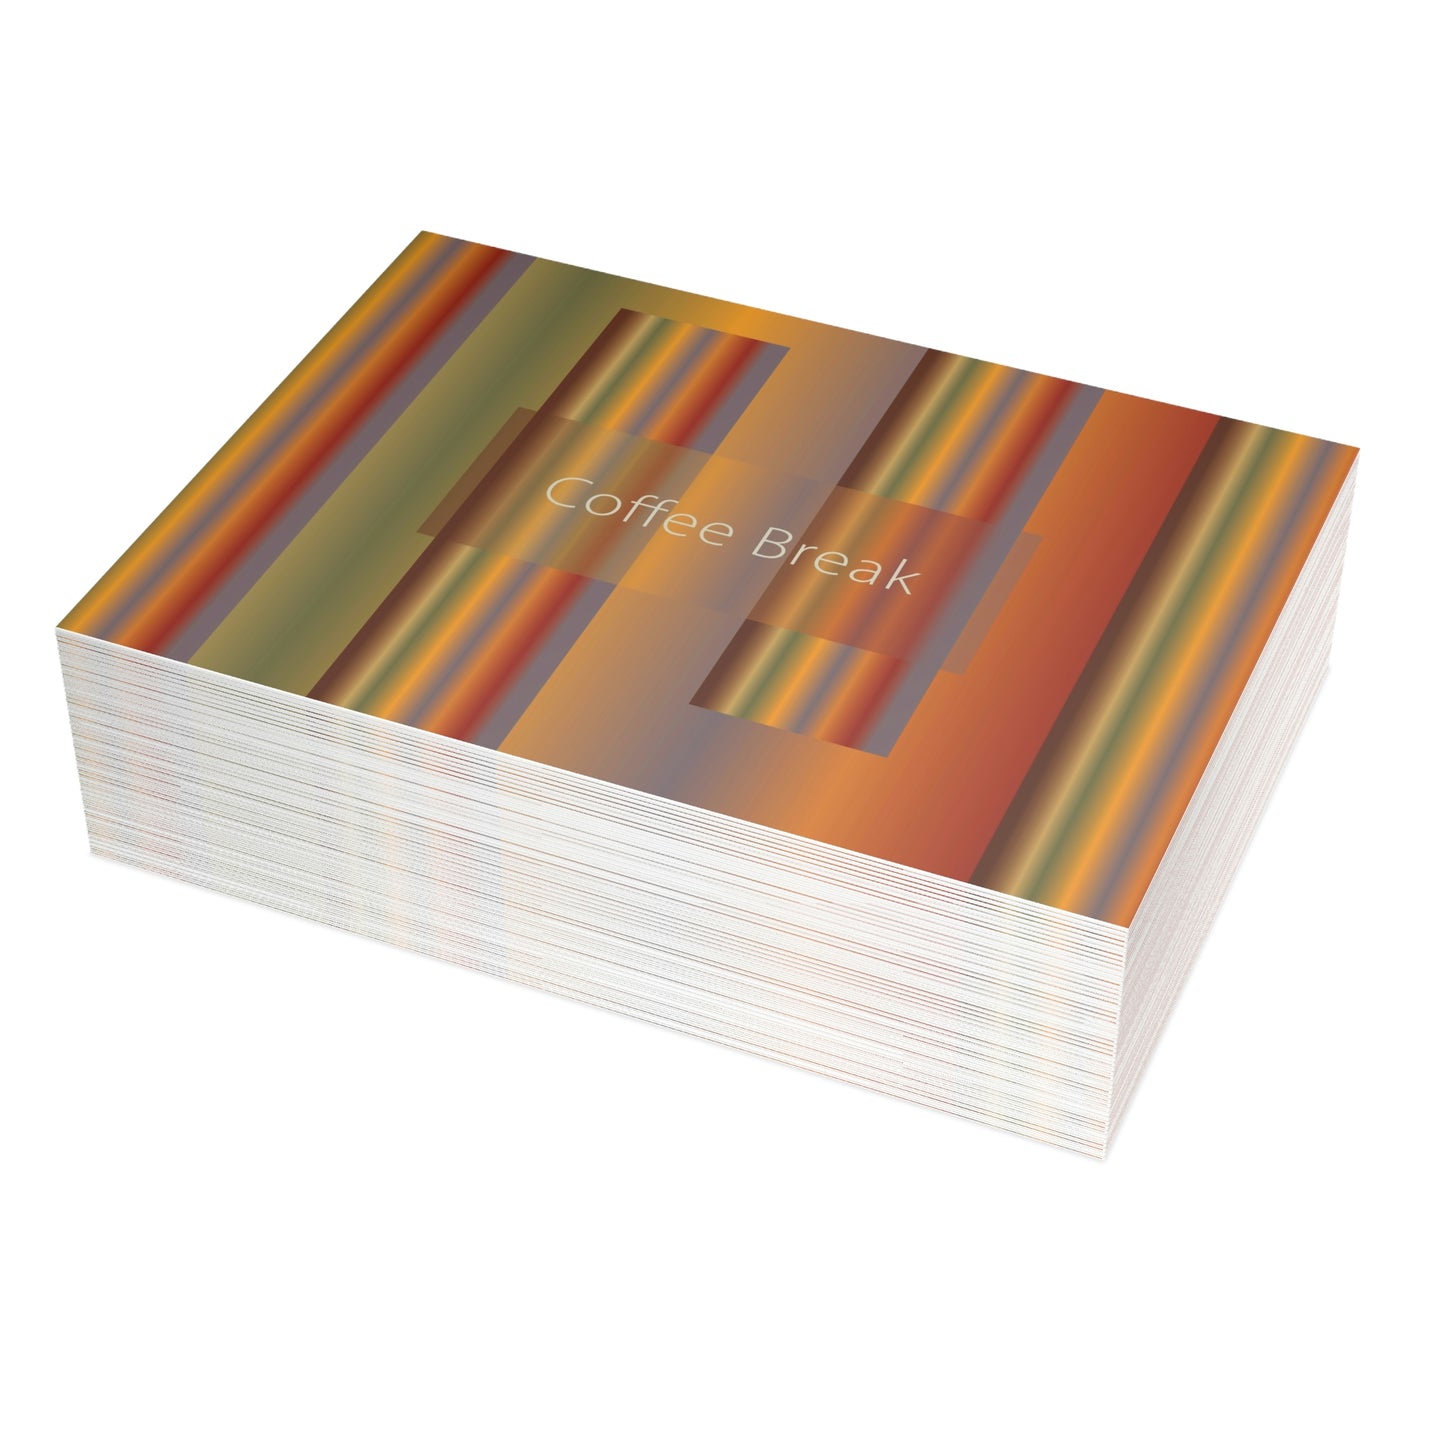 Unfolded Greeting Cards Horizontal (10, 30, and 50pcs) Coffee Break - Design No.1700